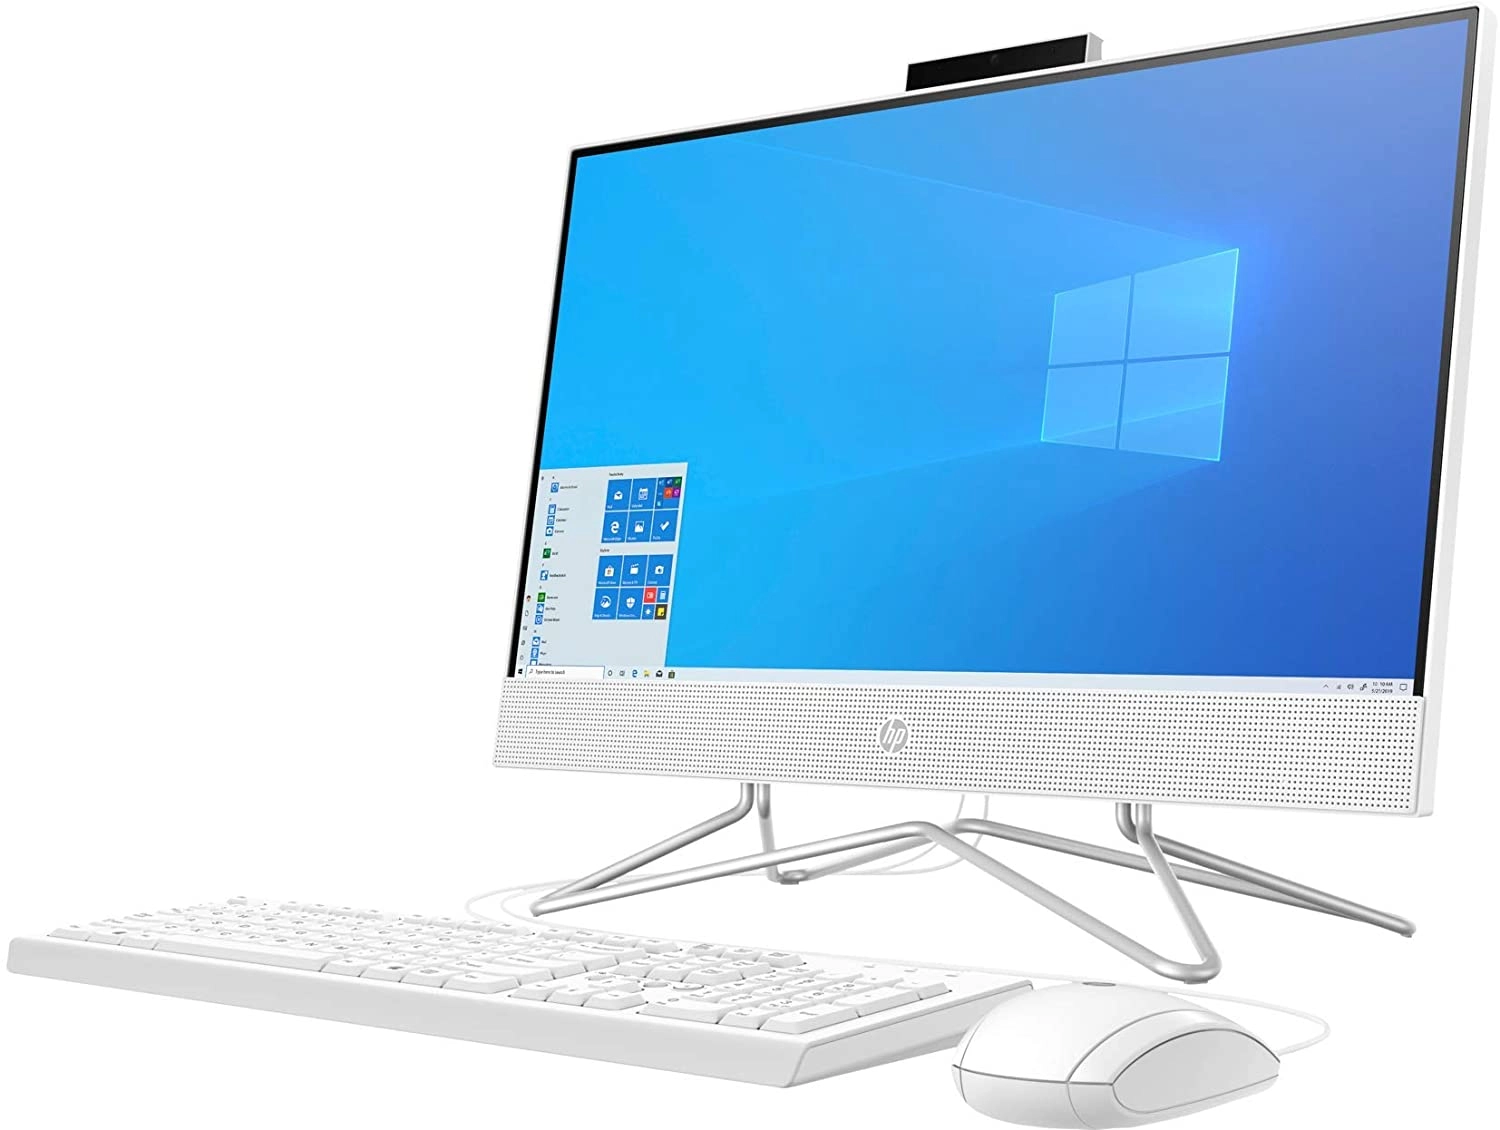 HP All-in-One laptop image